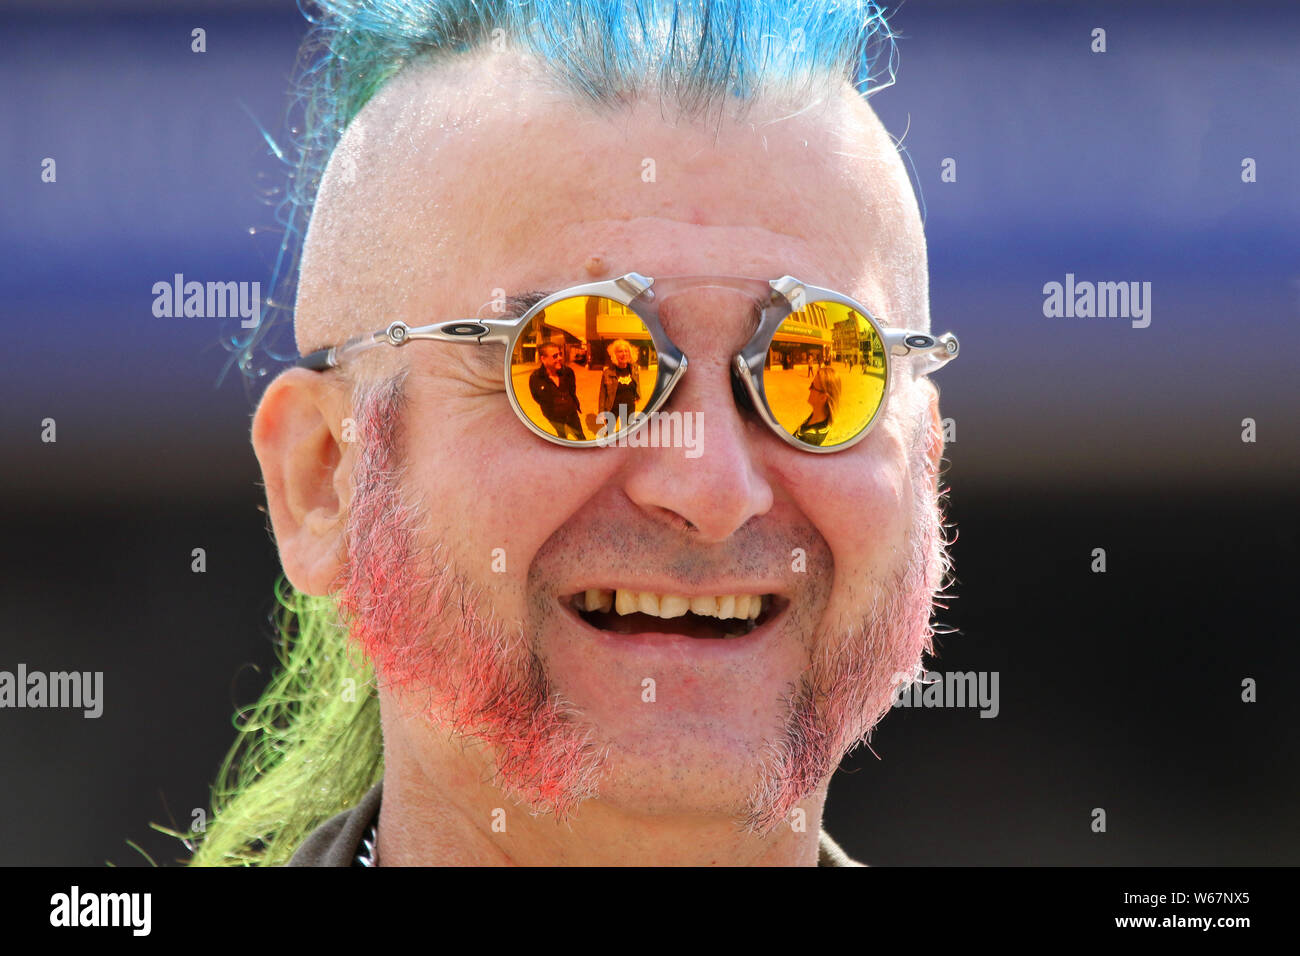 Elderly punk rocker with reflective sunglasses in Blackpool, Lancashire, UK. 31st July, 2019. The fabulous Punk Rebellion festival returns to the Winter Gardens in Blackpool for a weekend of live punk rock music. The Rebellion Festival, formerly Holidays in the Sun and the Wasted Festival is a British punk rock festival first held in 1996. This open to all event draws thousands of overseas visitors to see all their favourite punk musicians in one place. Stock Photo